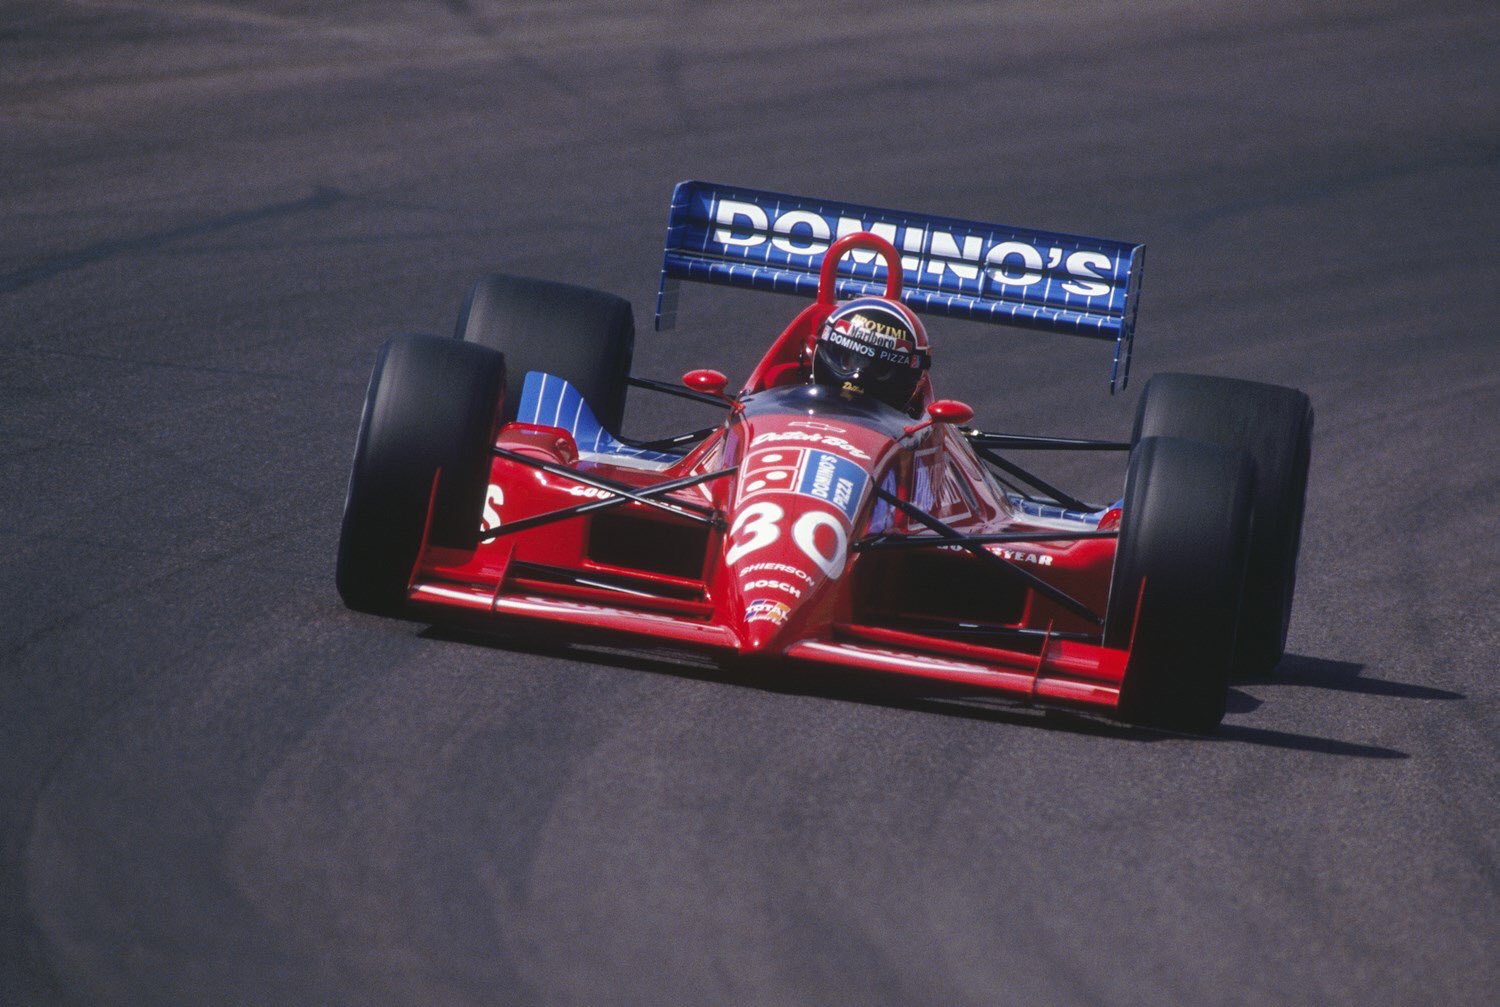 Happy Birthday to 1989 12 Hours of Sebring winner and 2-time Indianapolis 500 winner, Arie Luyendyk!  